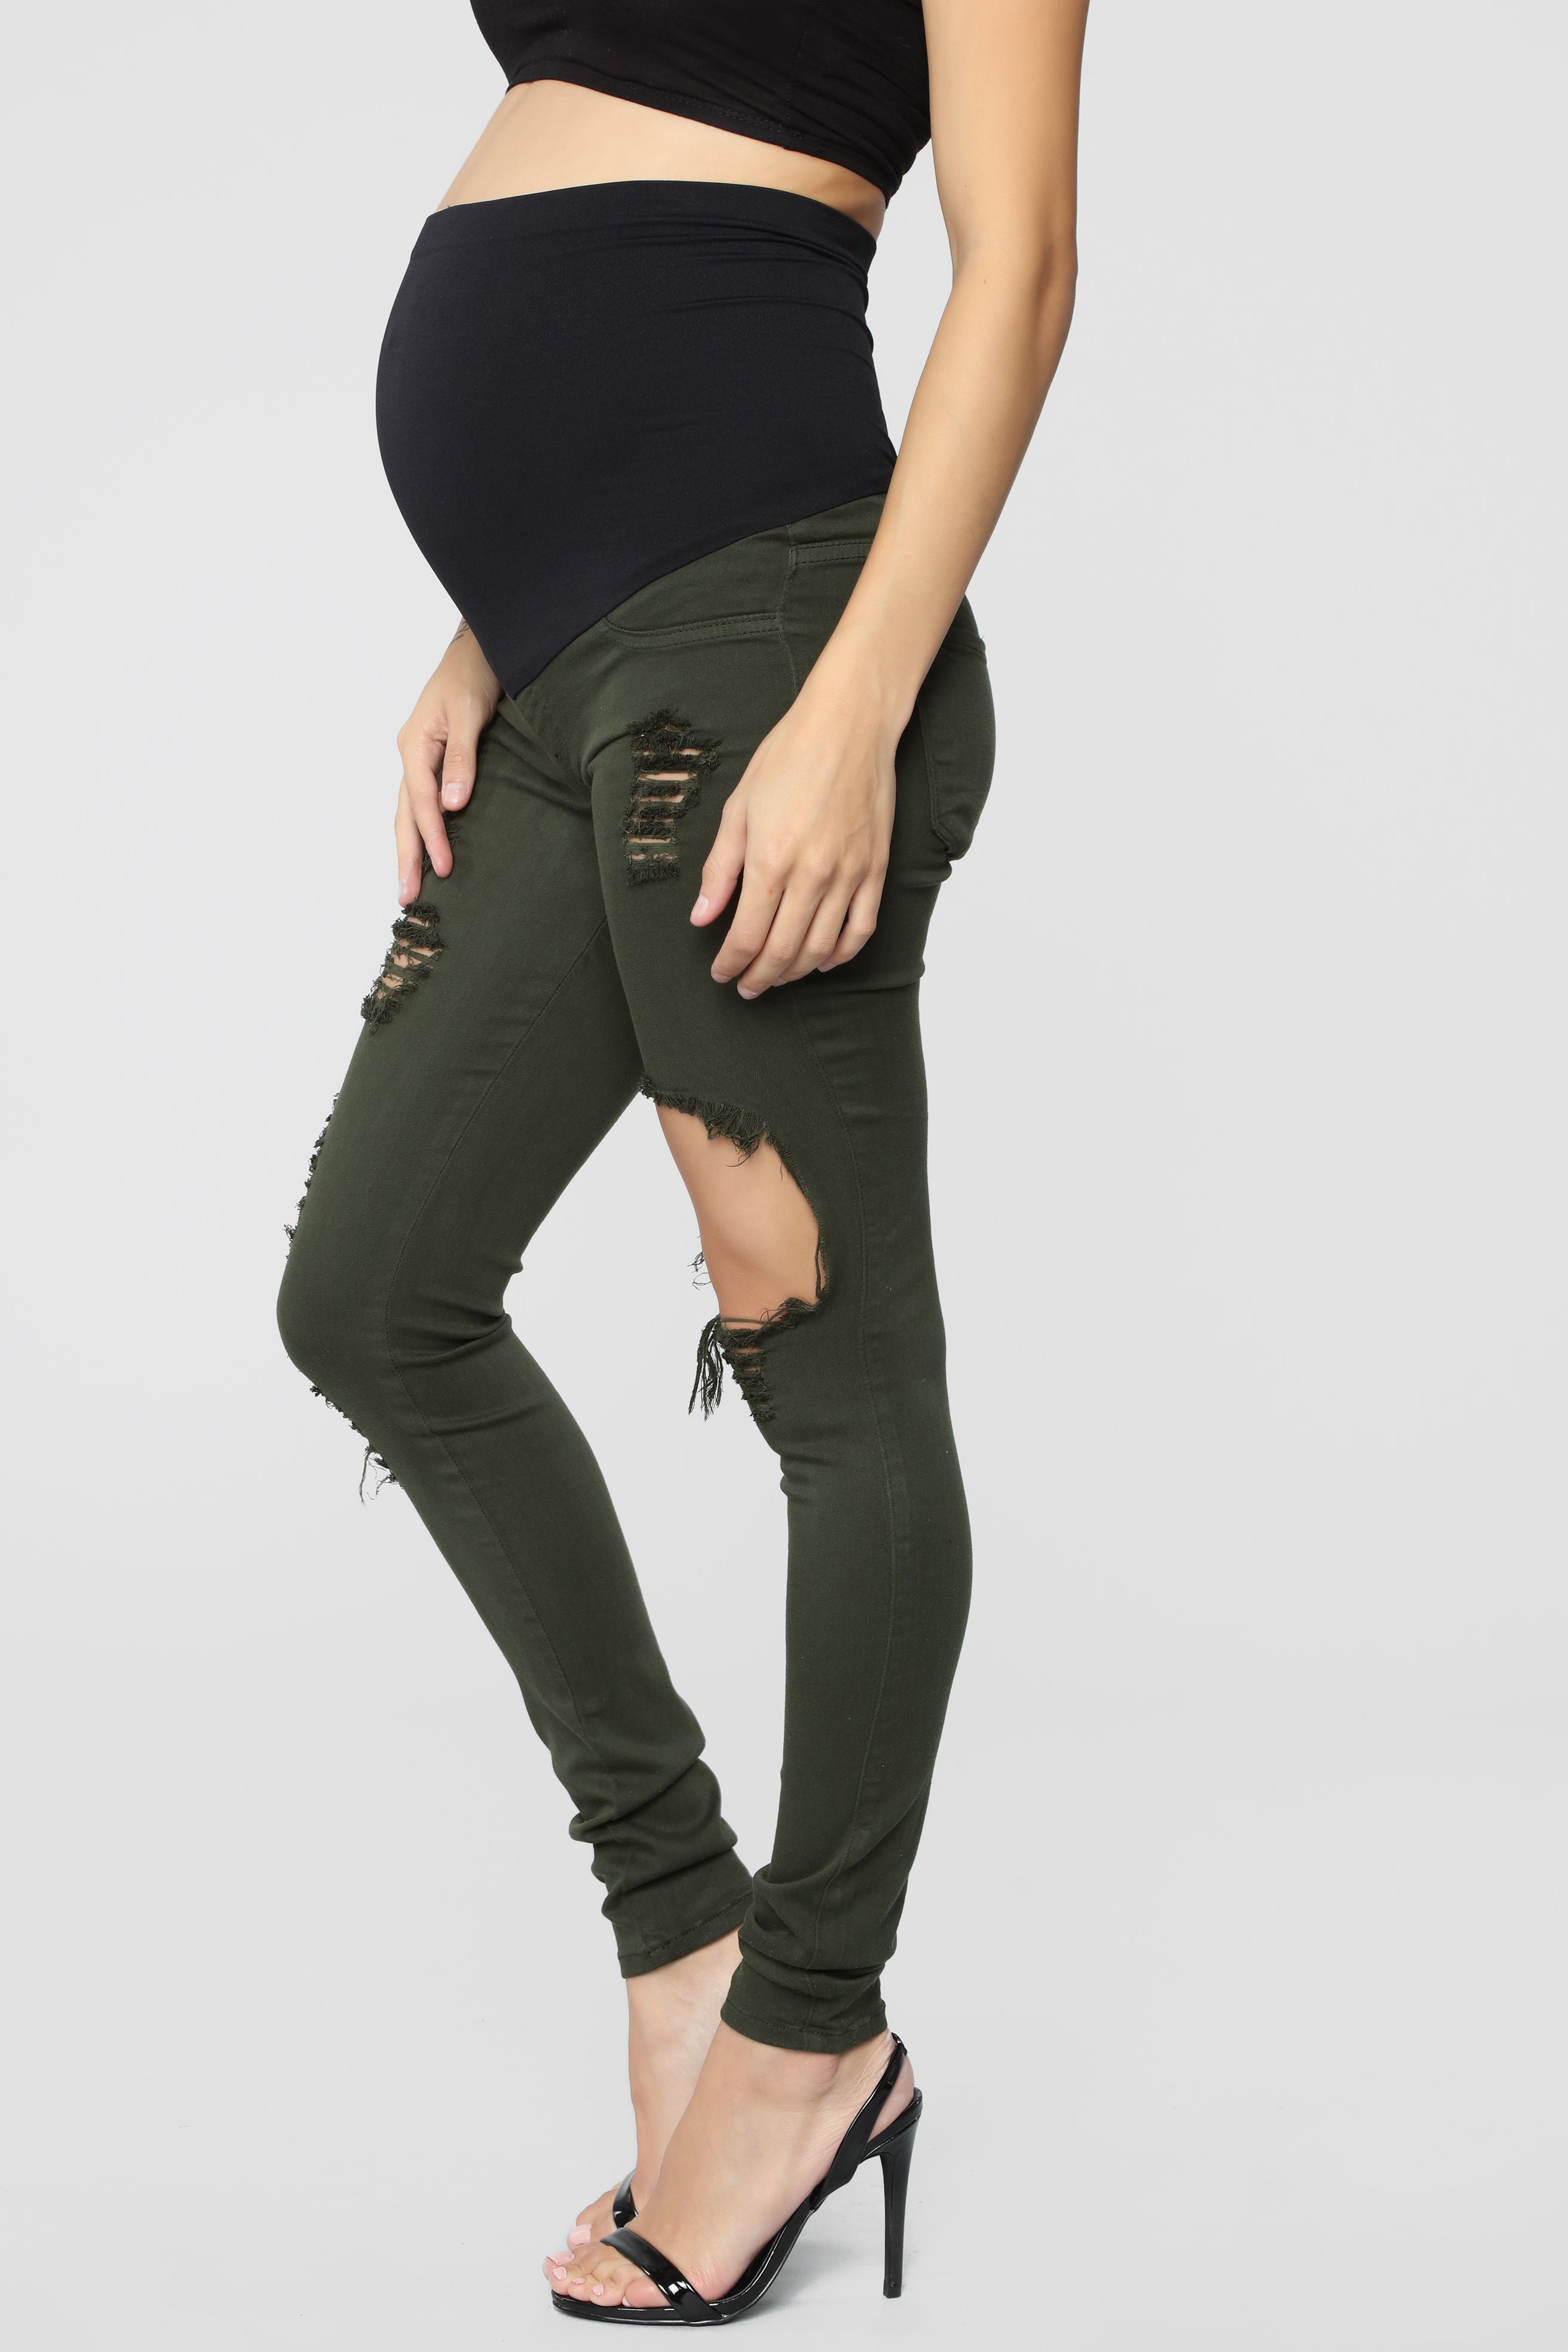 Glistening Maternity Jeans - Olive